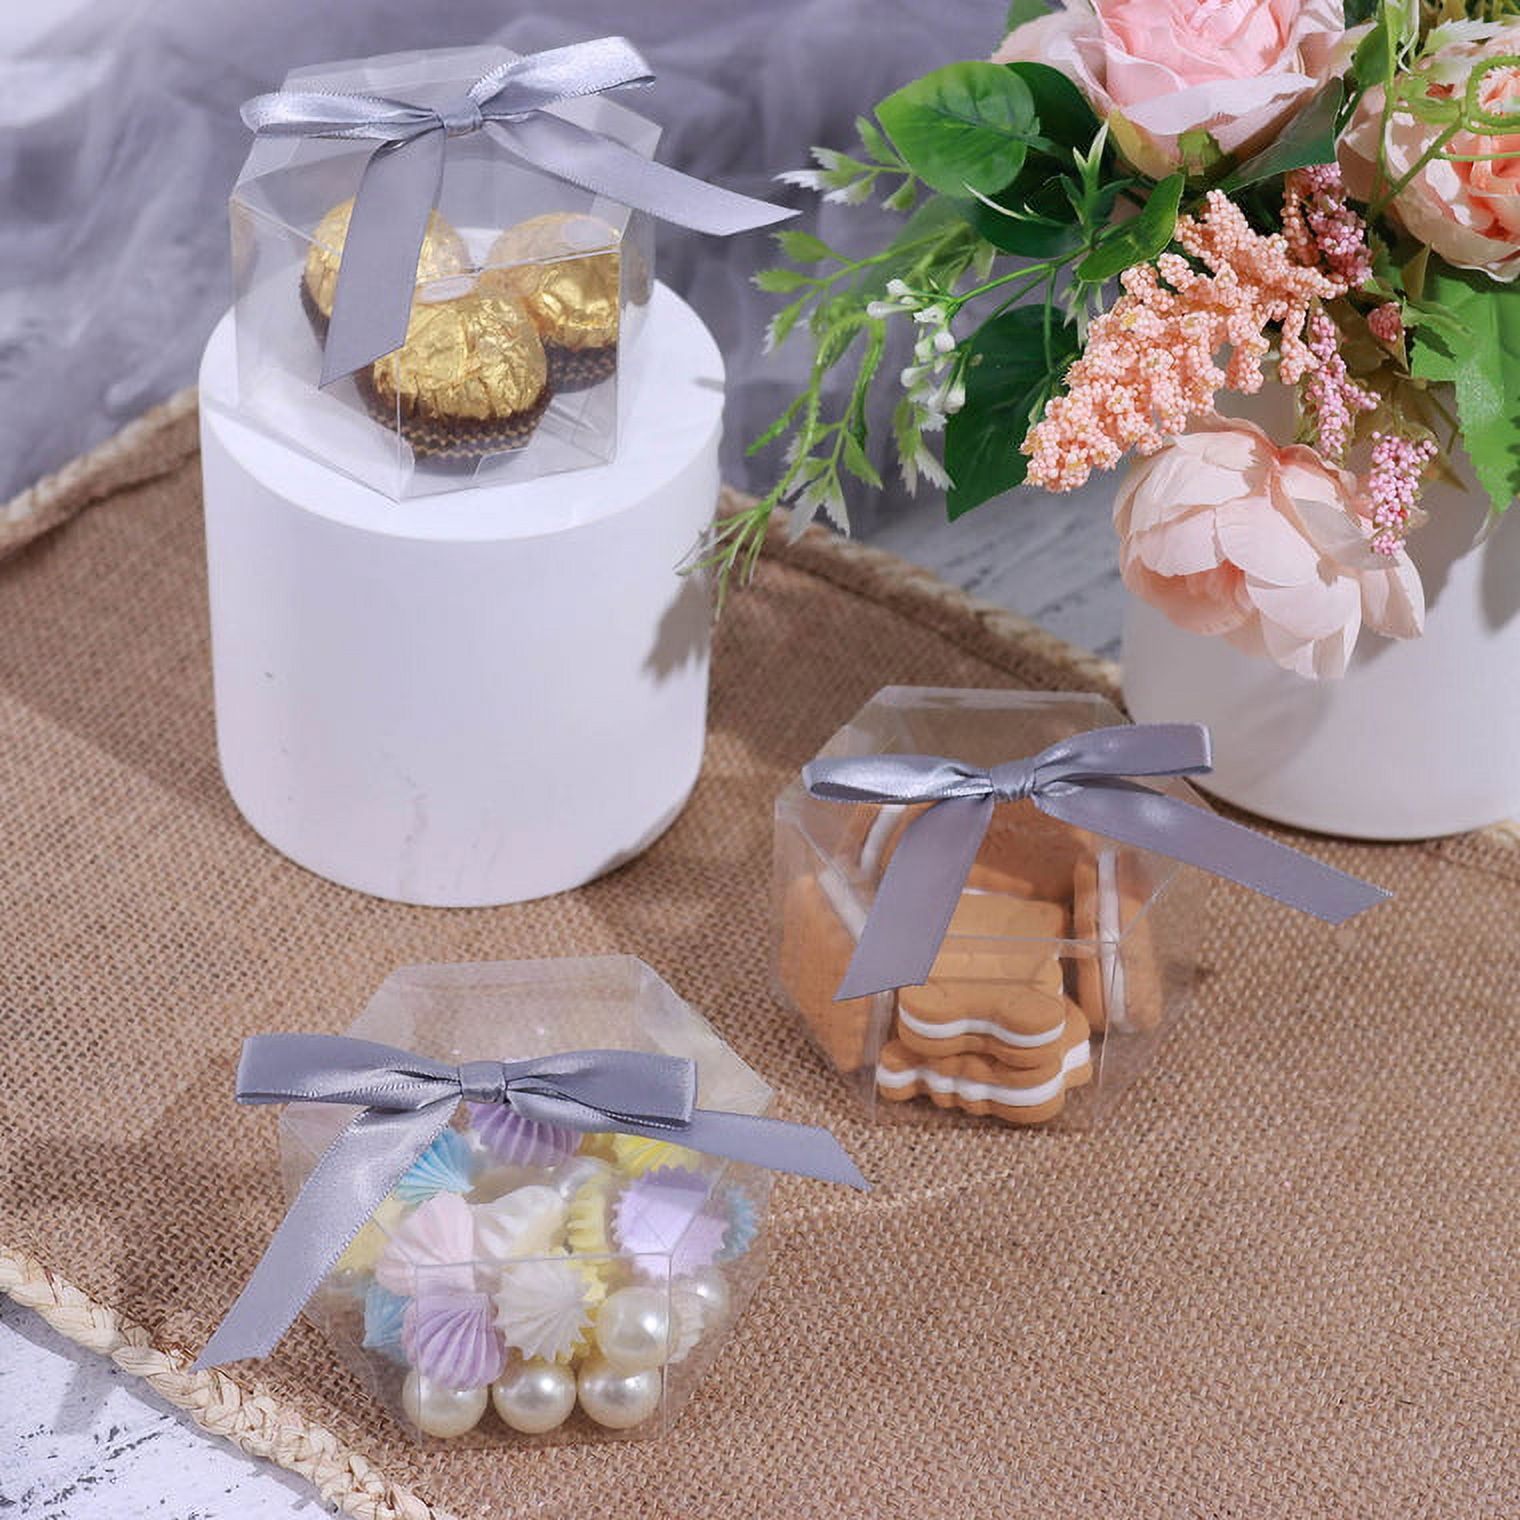 25 Pack of 3 X 3 X 3 Clear Boxes Wedding Favor Boxes 